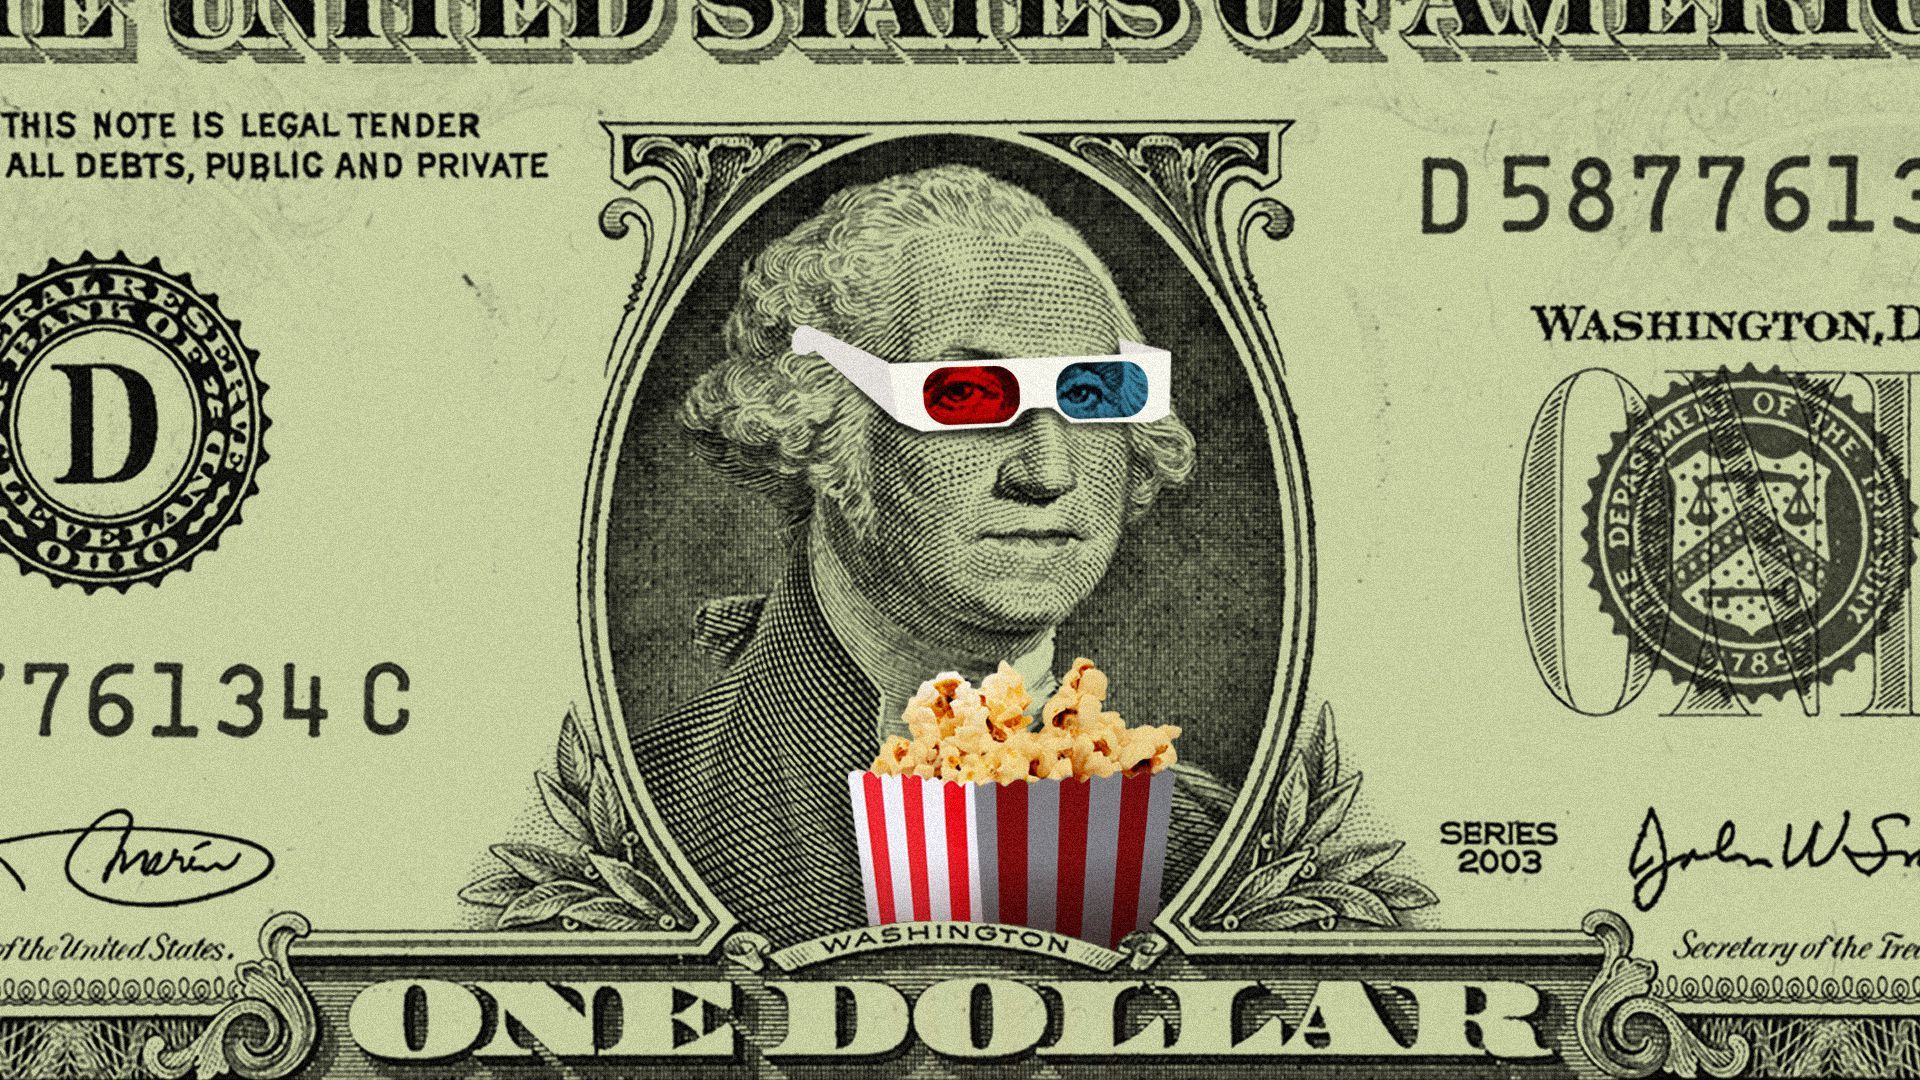 Illustration of George Washington on a one dollar bill wearing 3-D glasses and holding popcorn